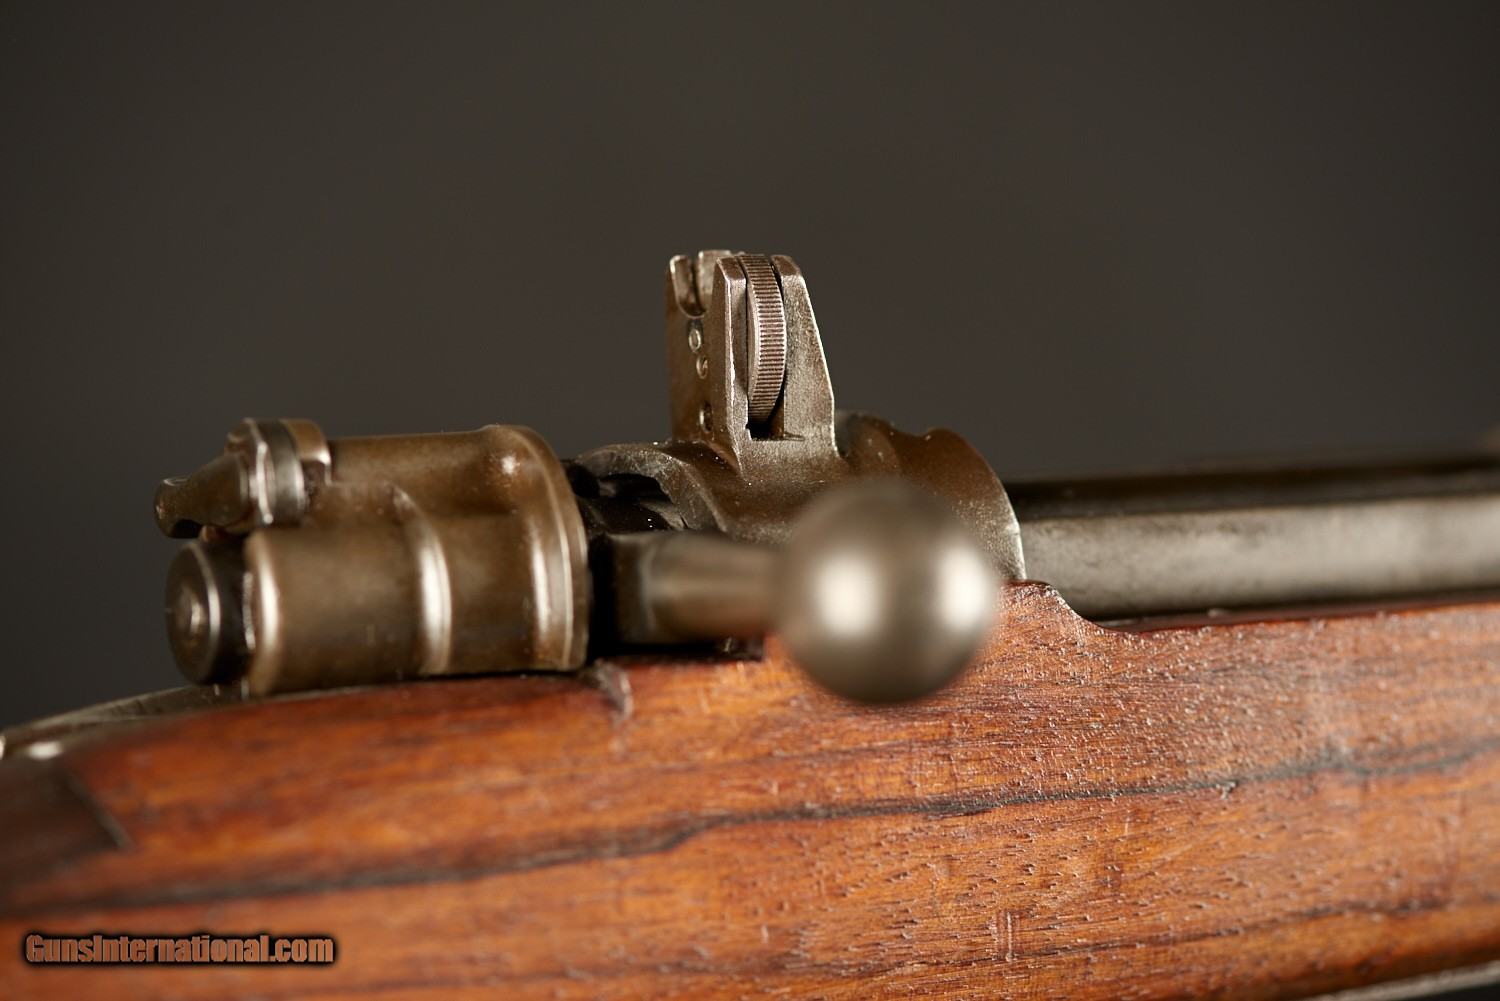 fr8 spanish mauser serial numbers